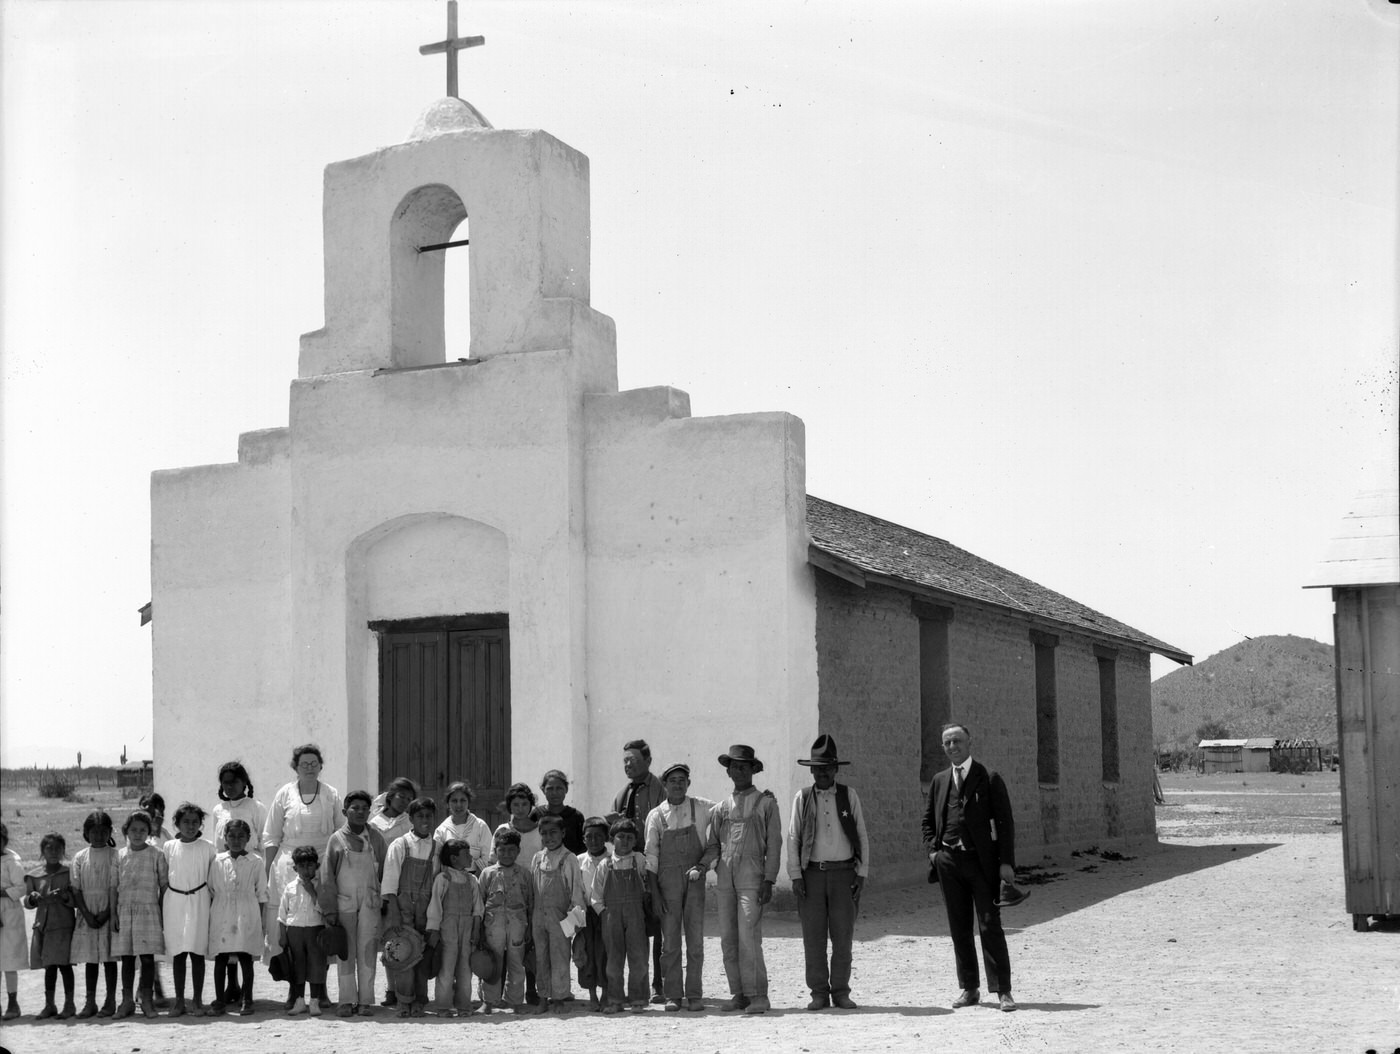 Church Exterior with Congregation, 1900s